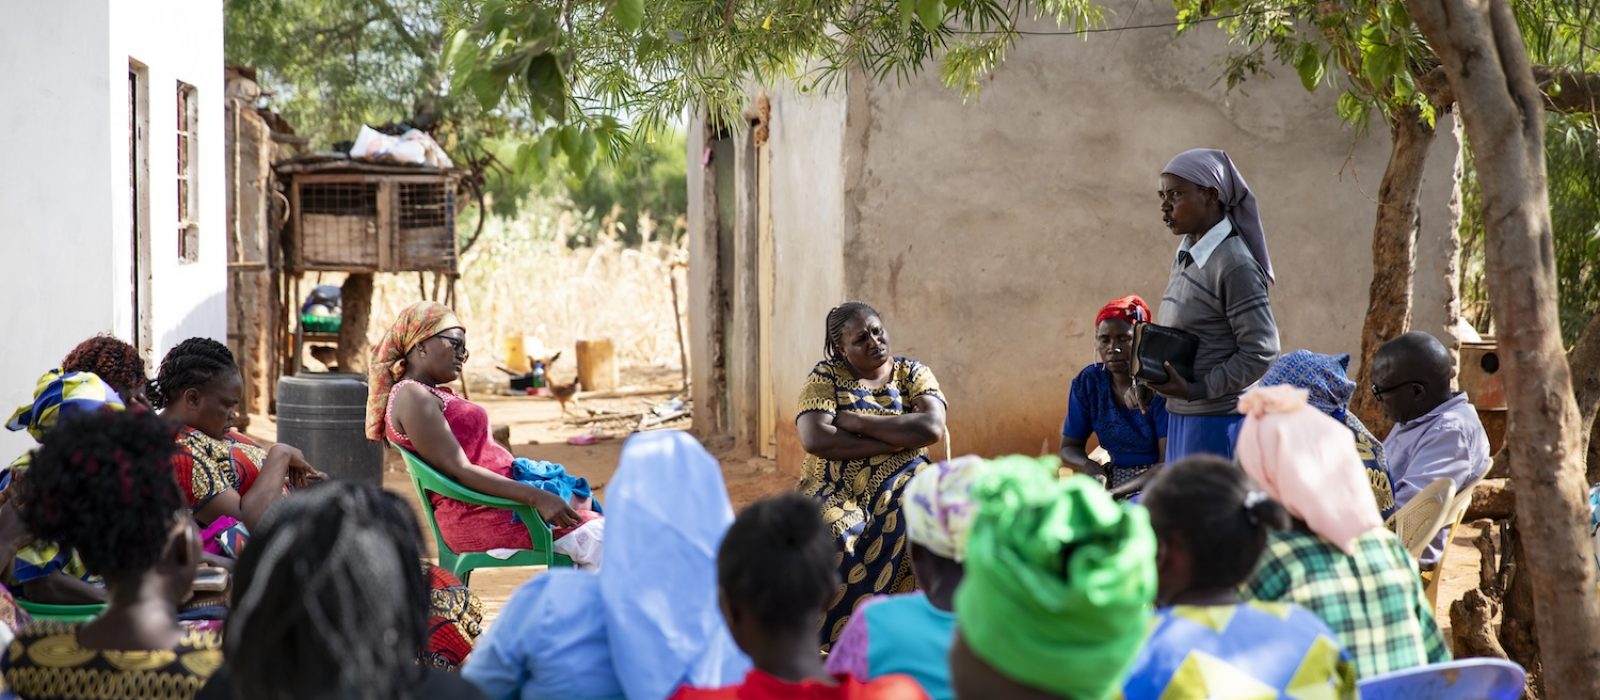 Pastor Grace James reads from the bible at a women's bible study group in Makindu, Kenya, on 28 June 2023.

Tearfund partners with local churches and organisations in Kenya, like Fadhili Trust,  to reduce poverty.